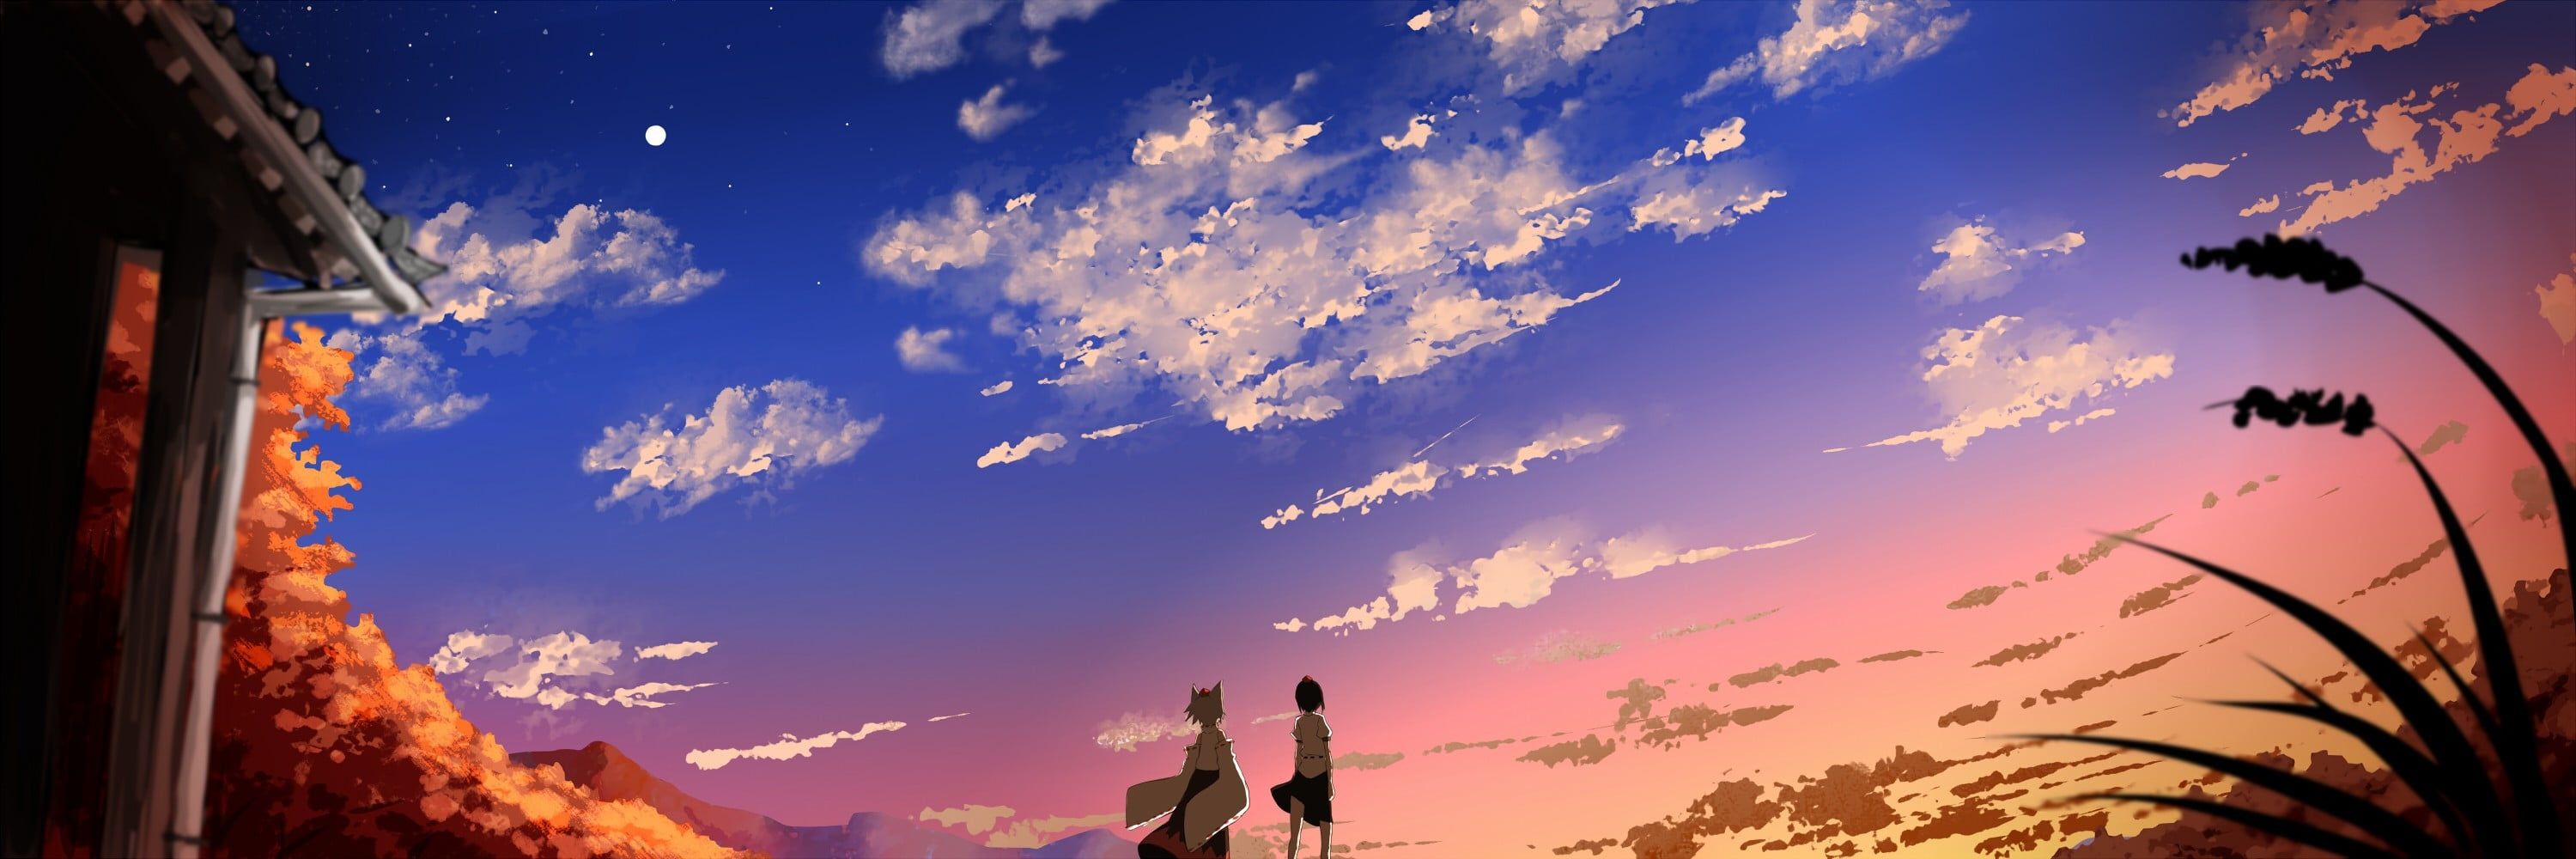 Your Name anime poster, clouds, sky, sunset, fantasy art HD